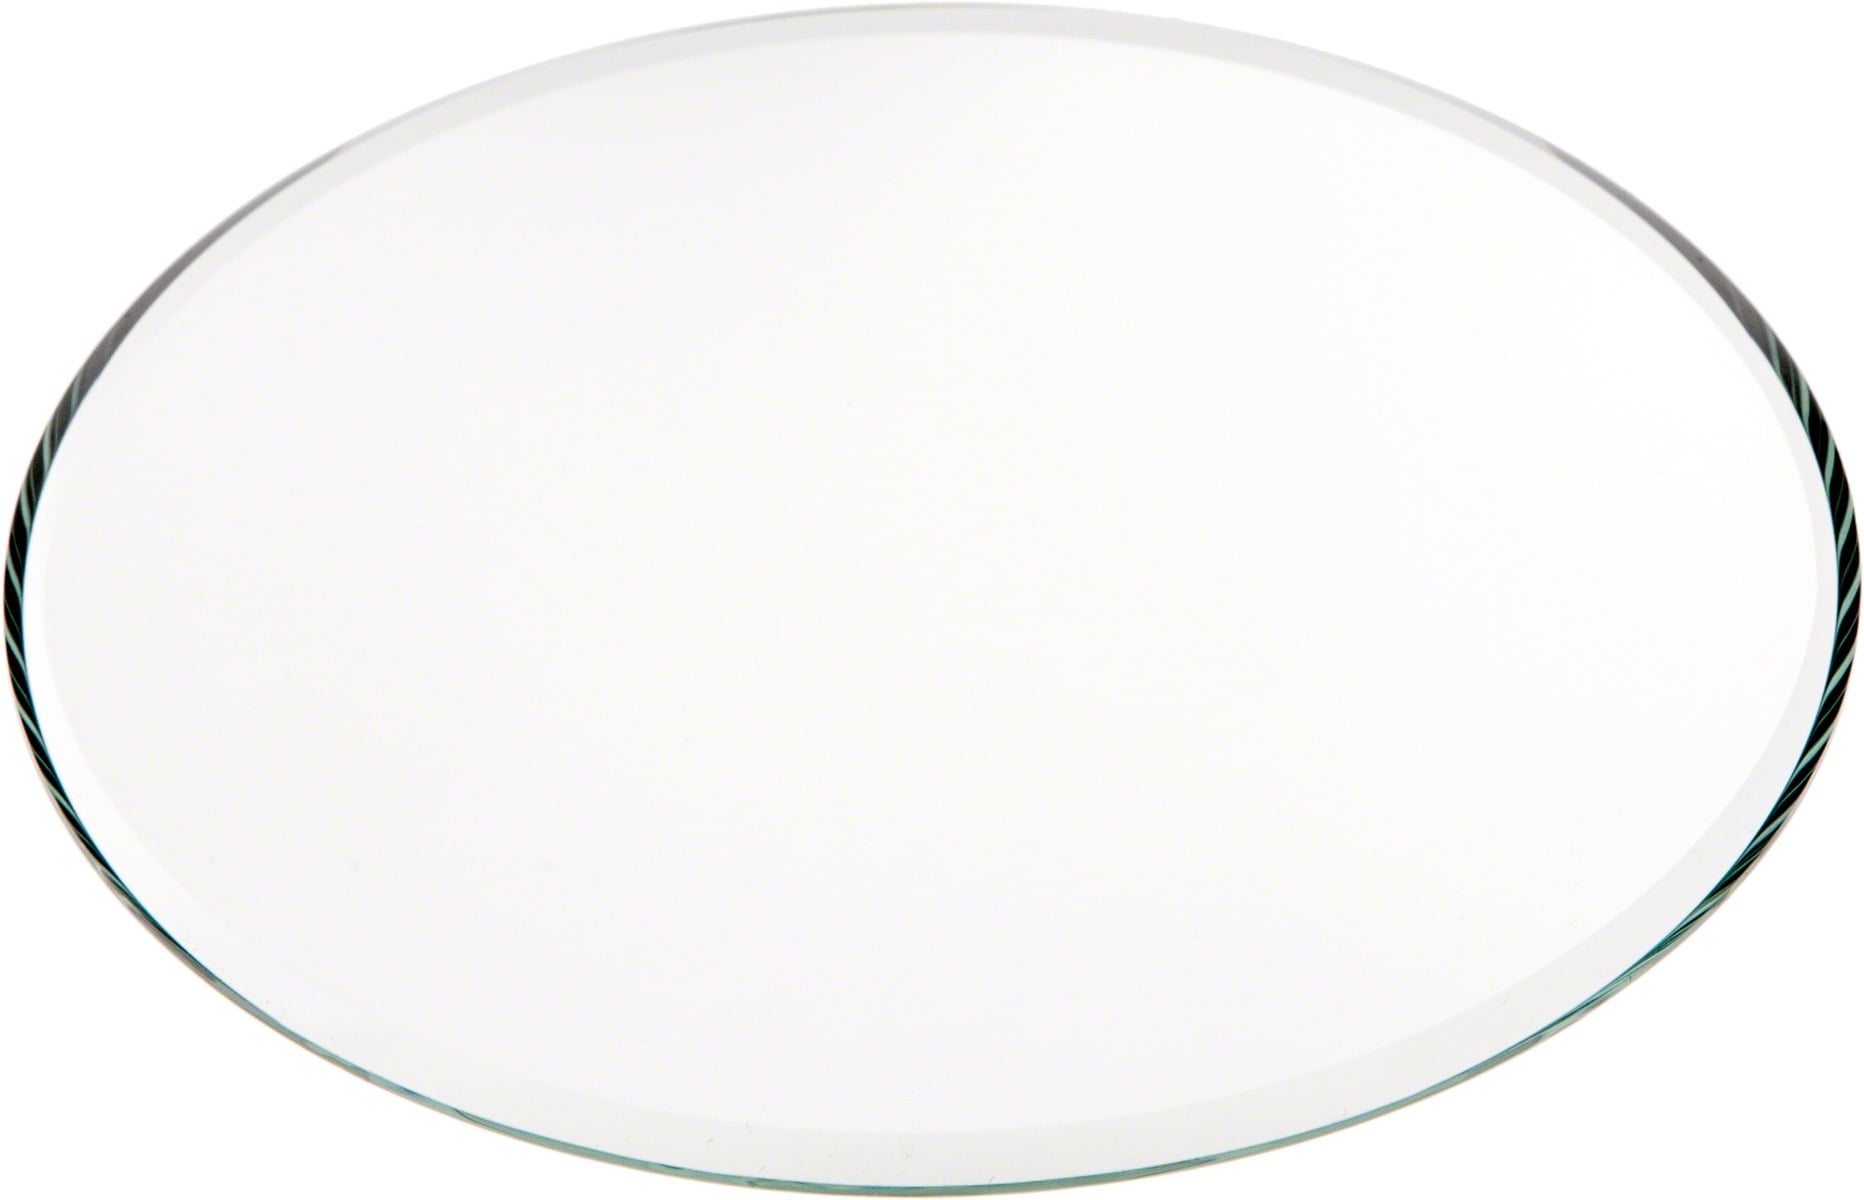 5 inch x 5 inch Plymor Round 3mm Beveled Scalloped Glass Mirror